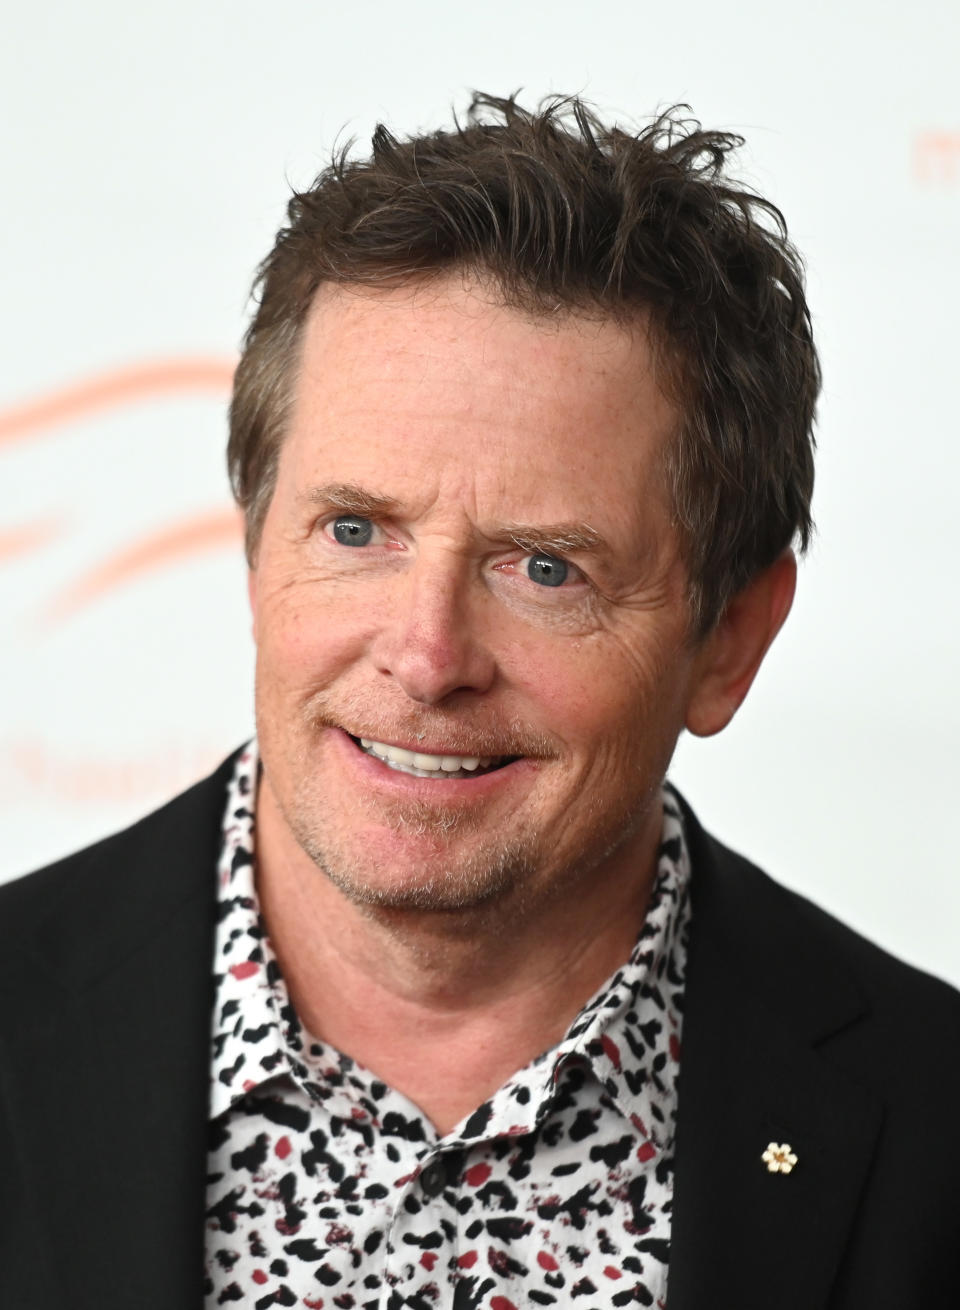 Michael J. Fox poses at the A Funny Thing Happened On The Way To Cure Parkinson's event on October 23, 2021